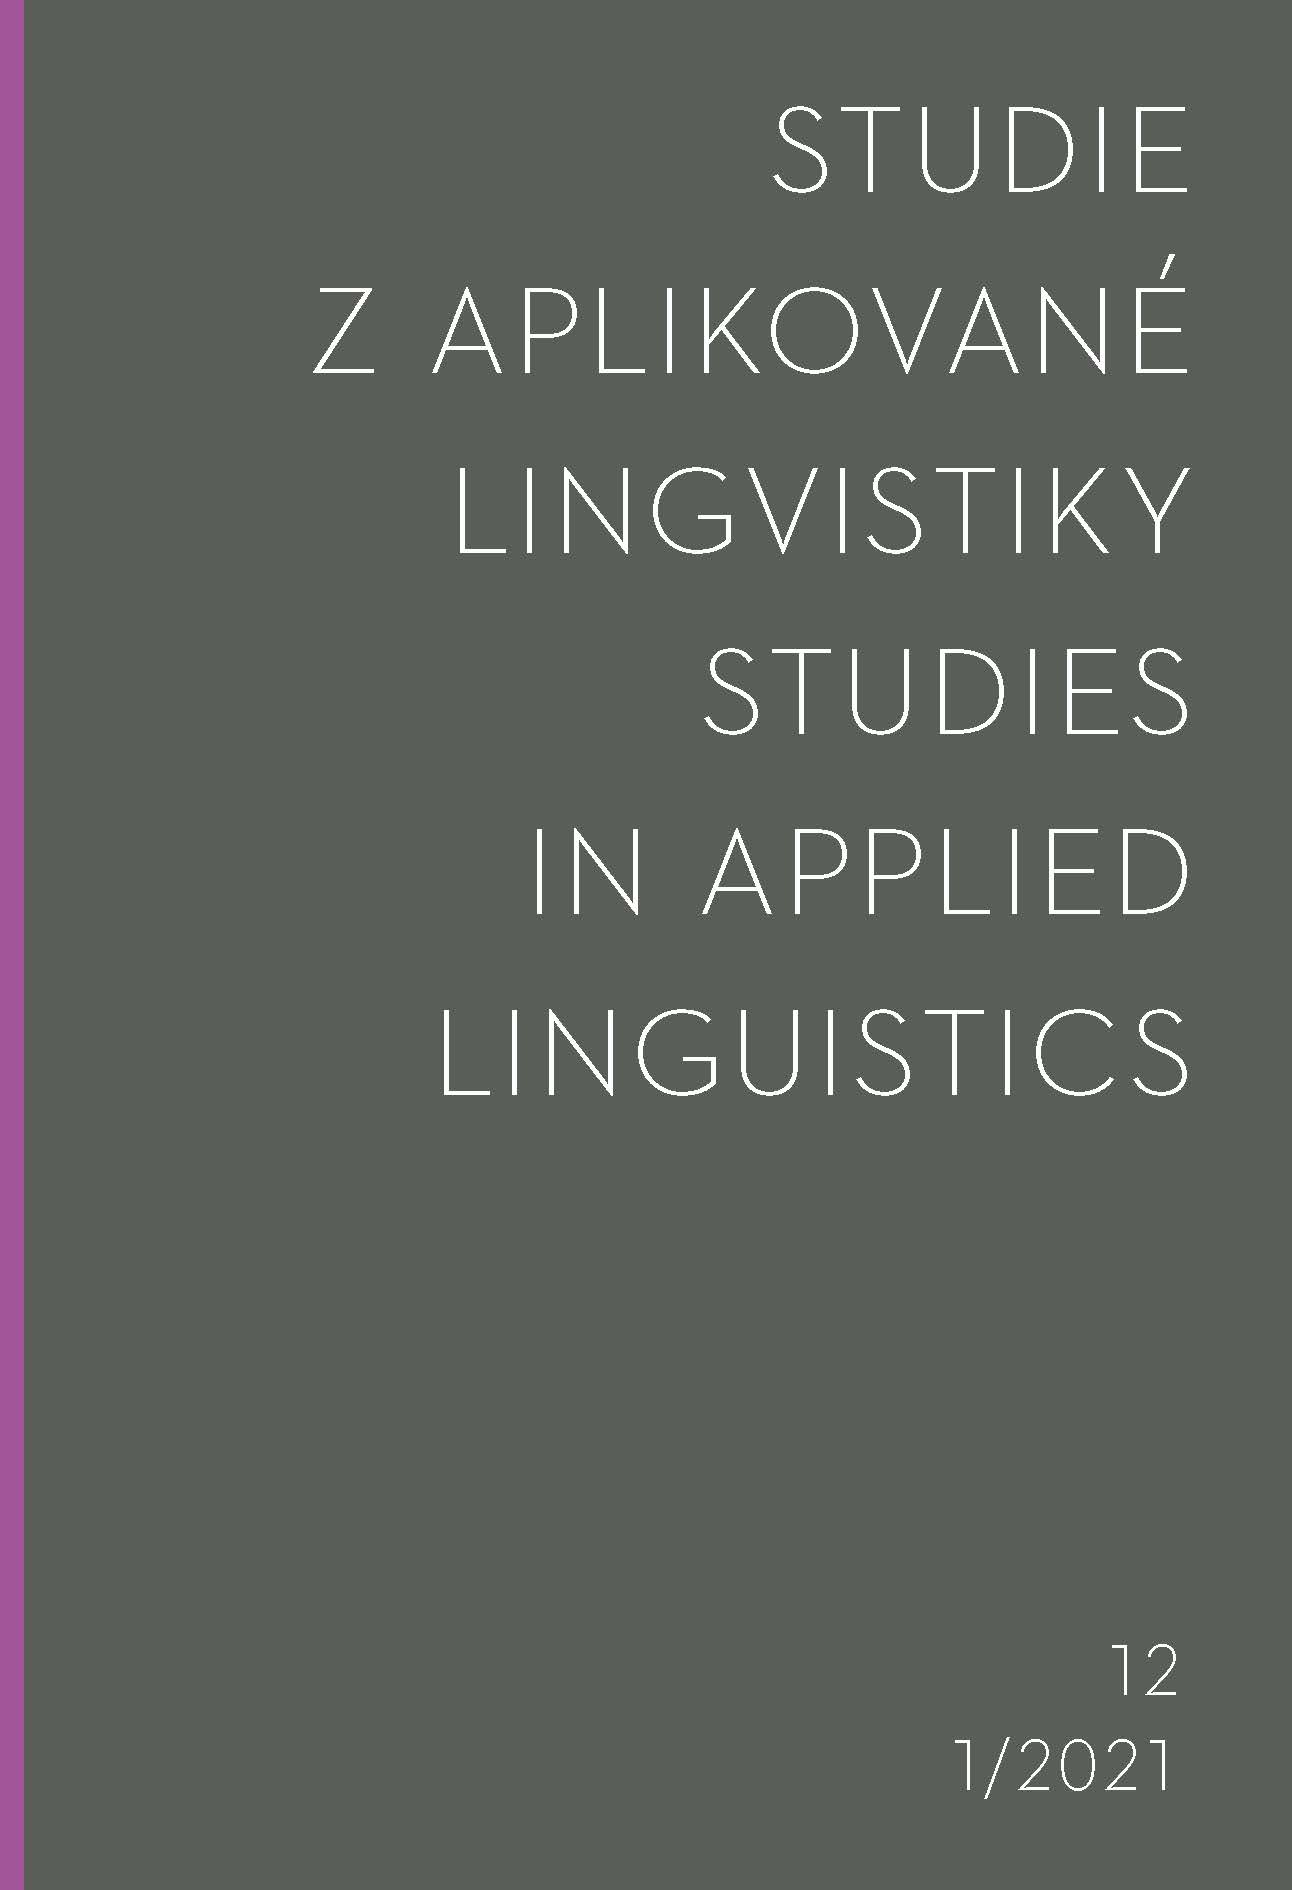 Readability of professional and administrative texts in Czech — why to study it and how to measure it? Cover Image